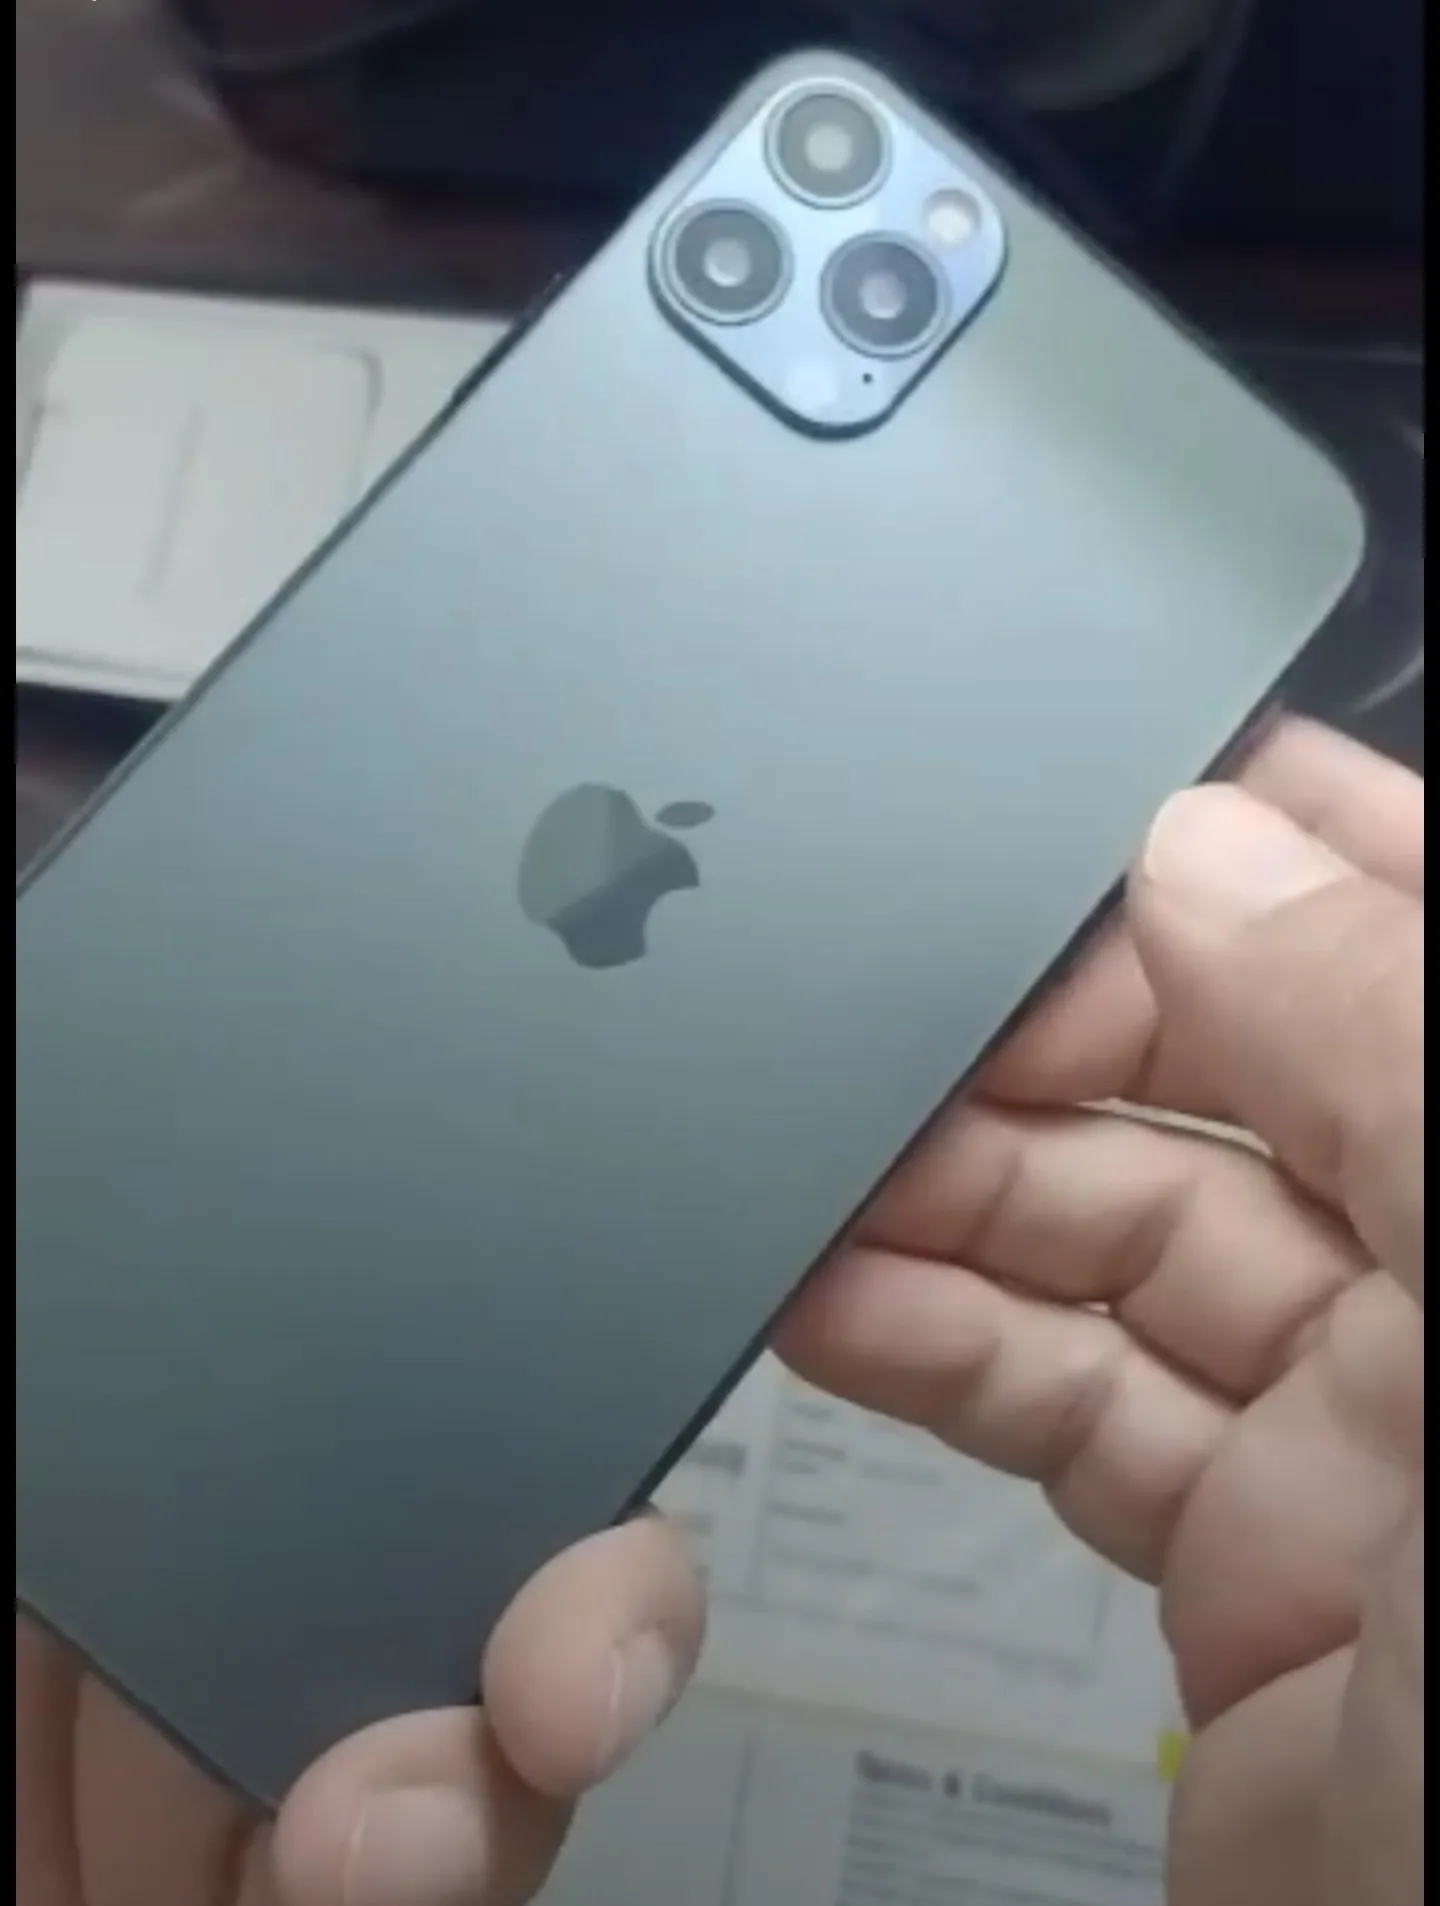 Offer for karachi users iphone 11 and 12 pro max turkish made ramazn offer - photo 1